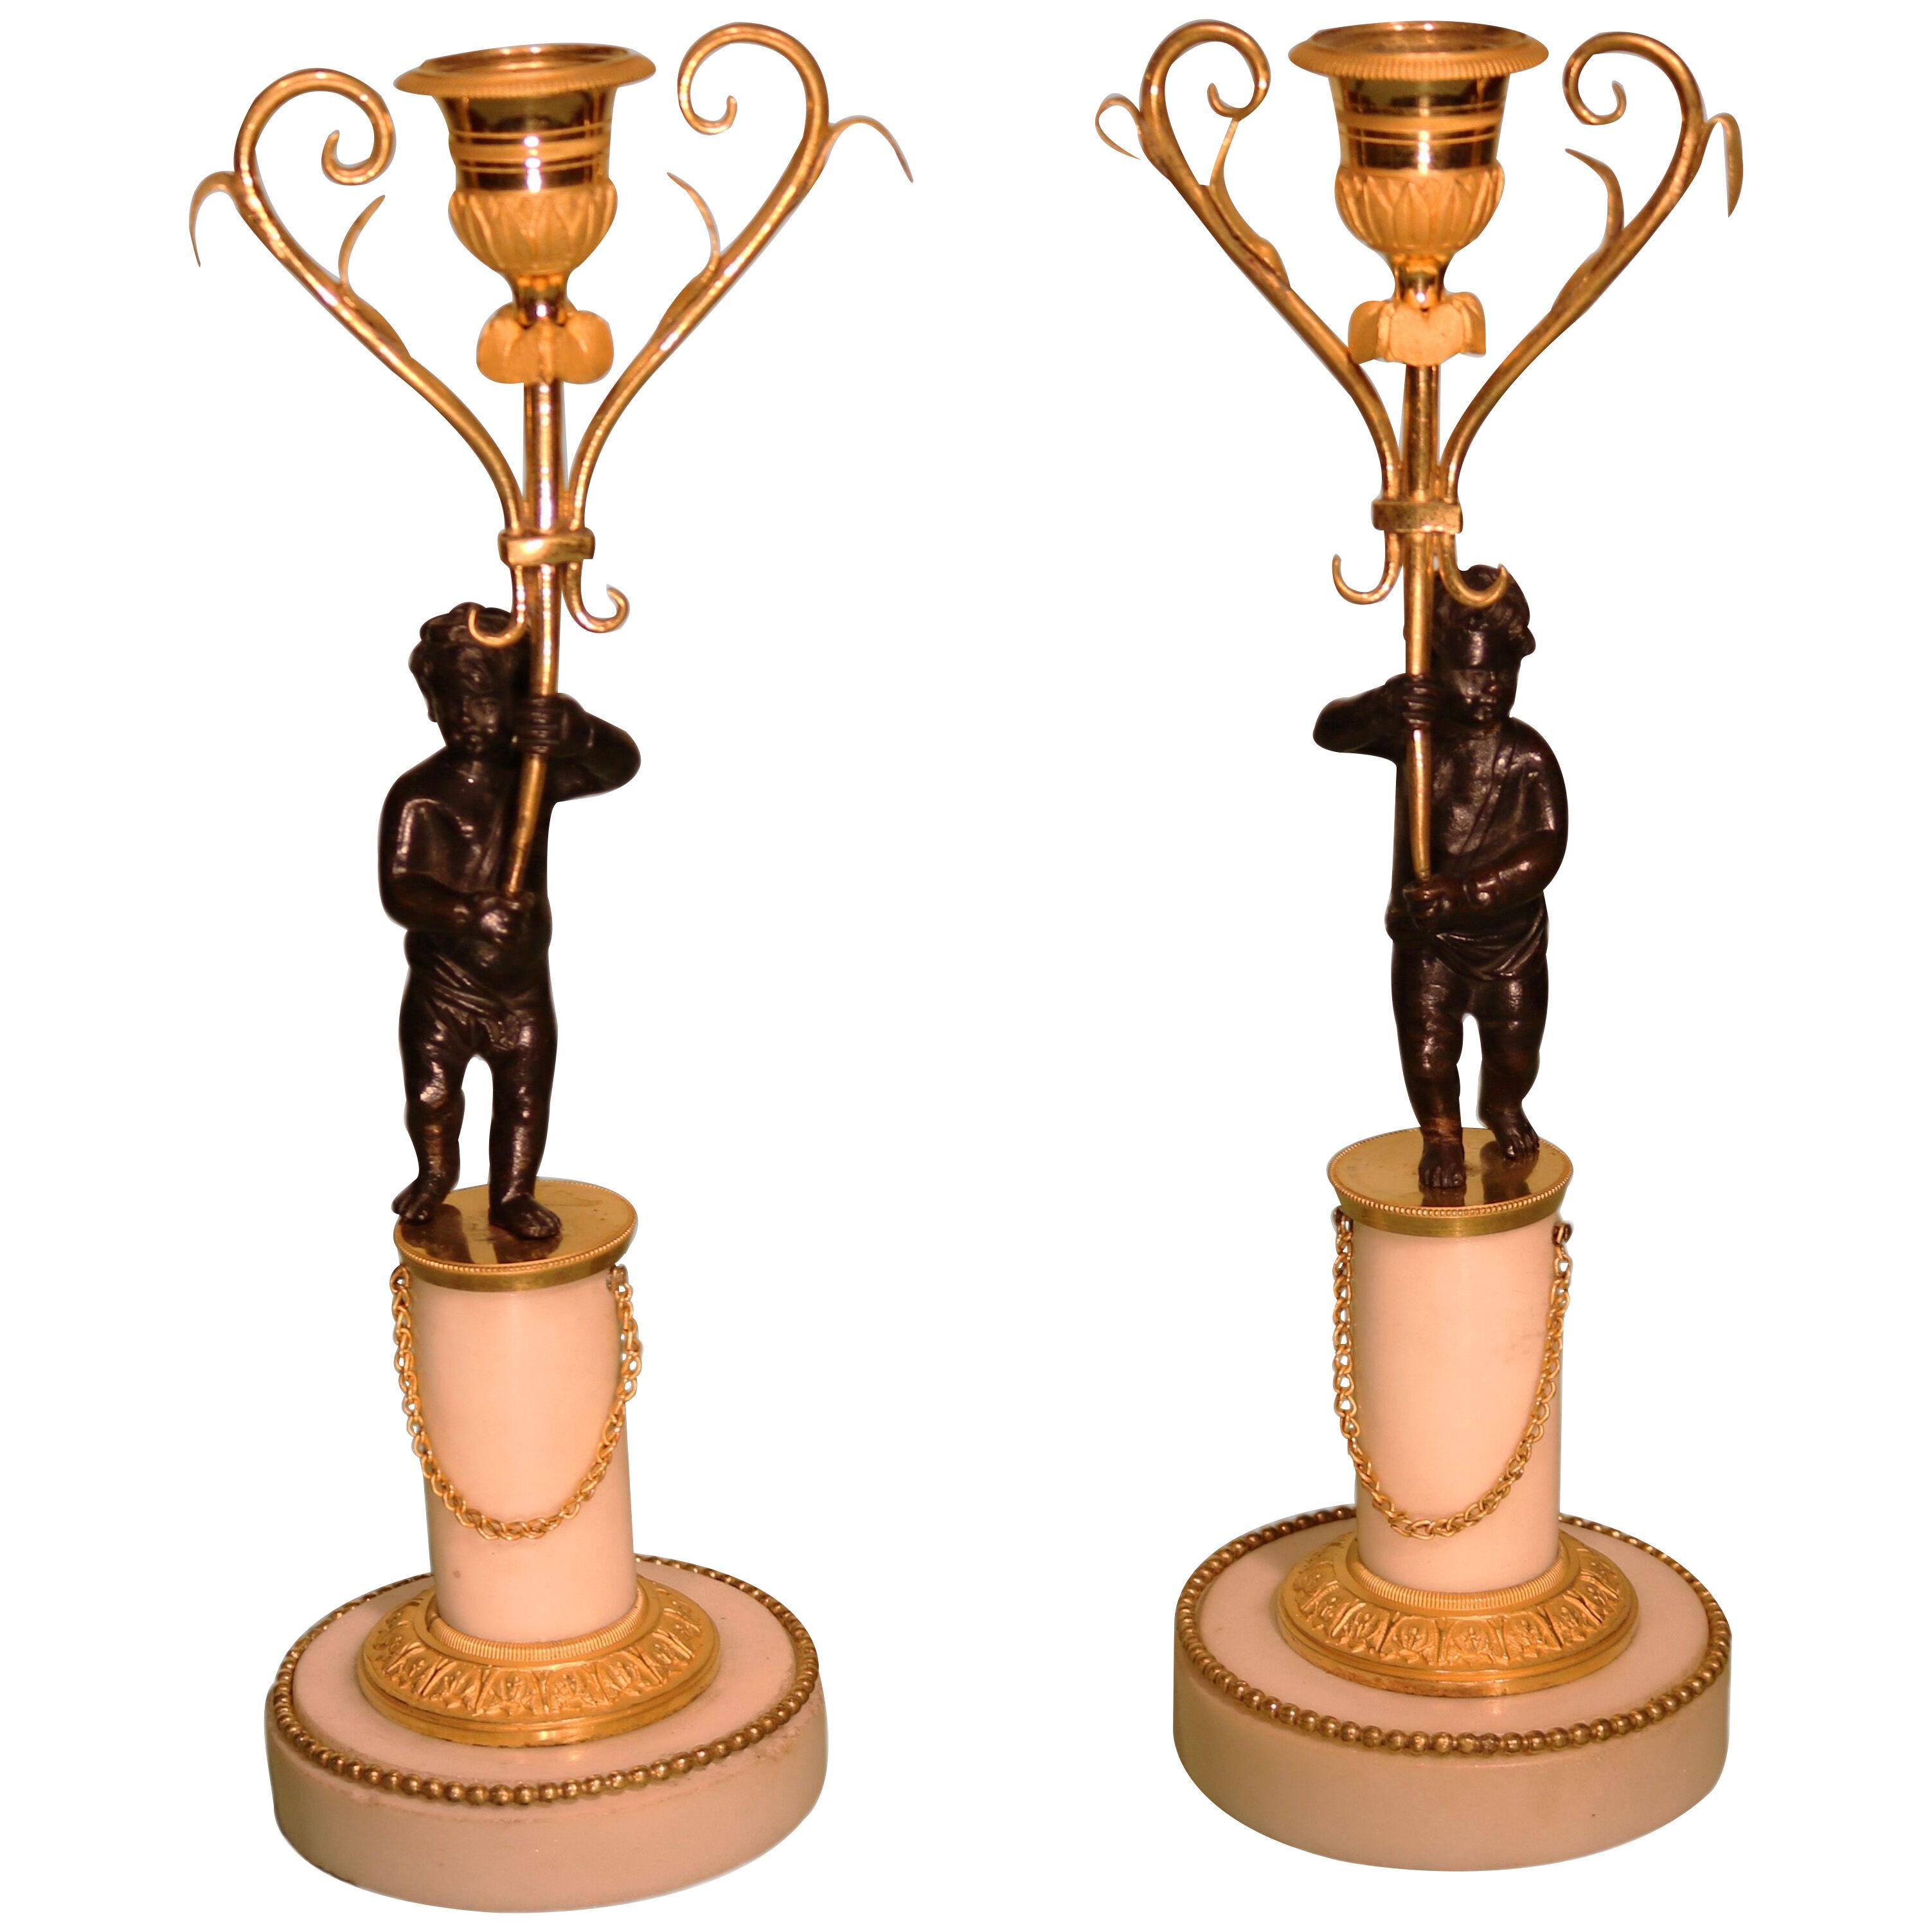 A pair of 19th century white marble and bronze and ormolu candlesticks